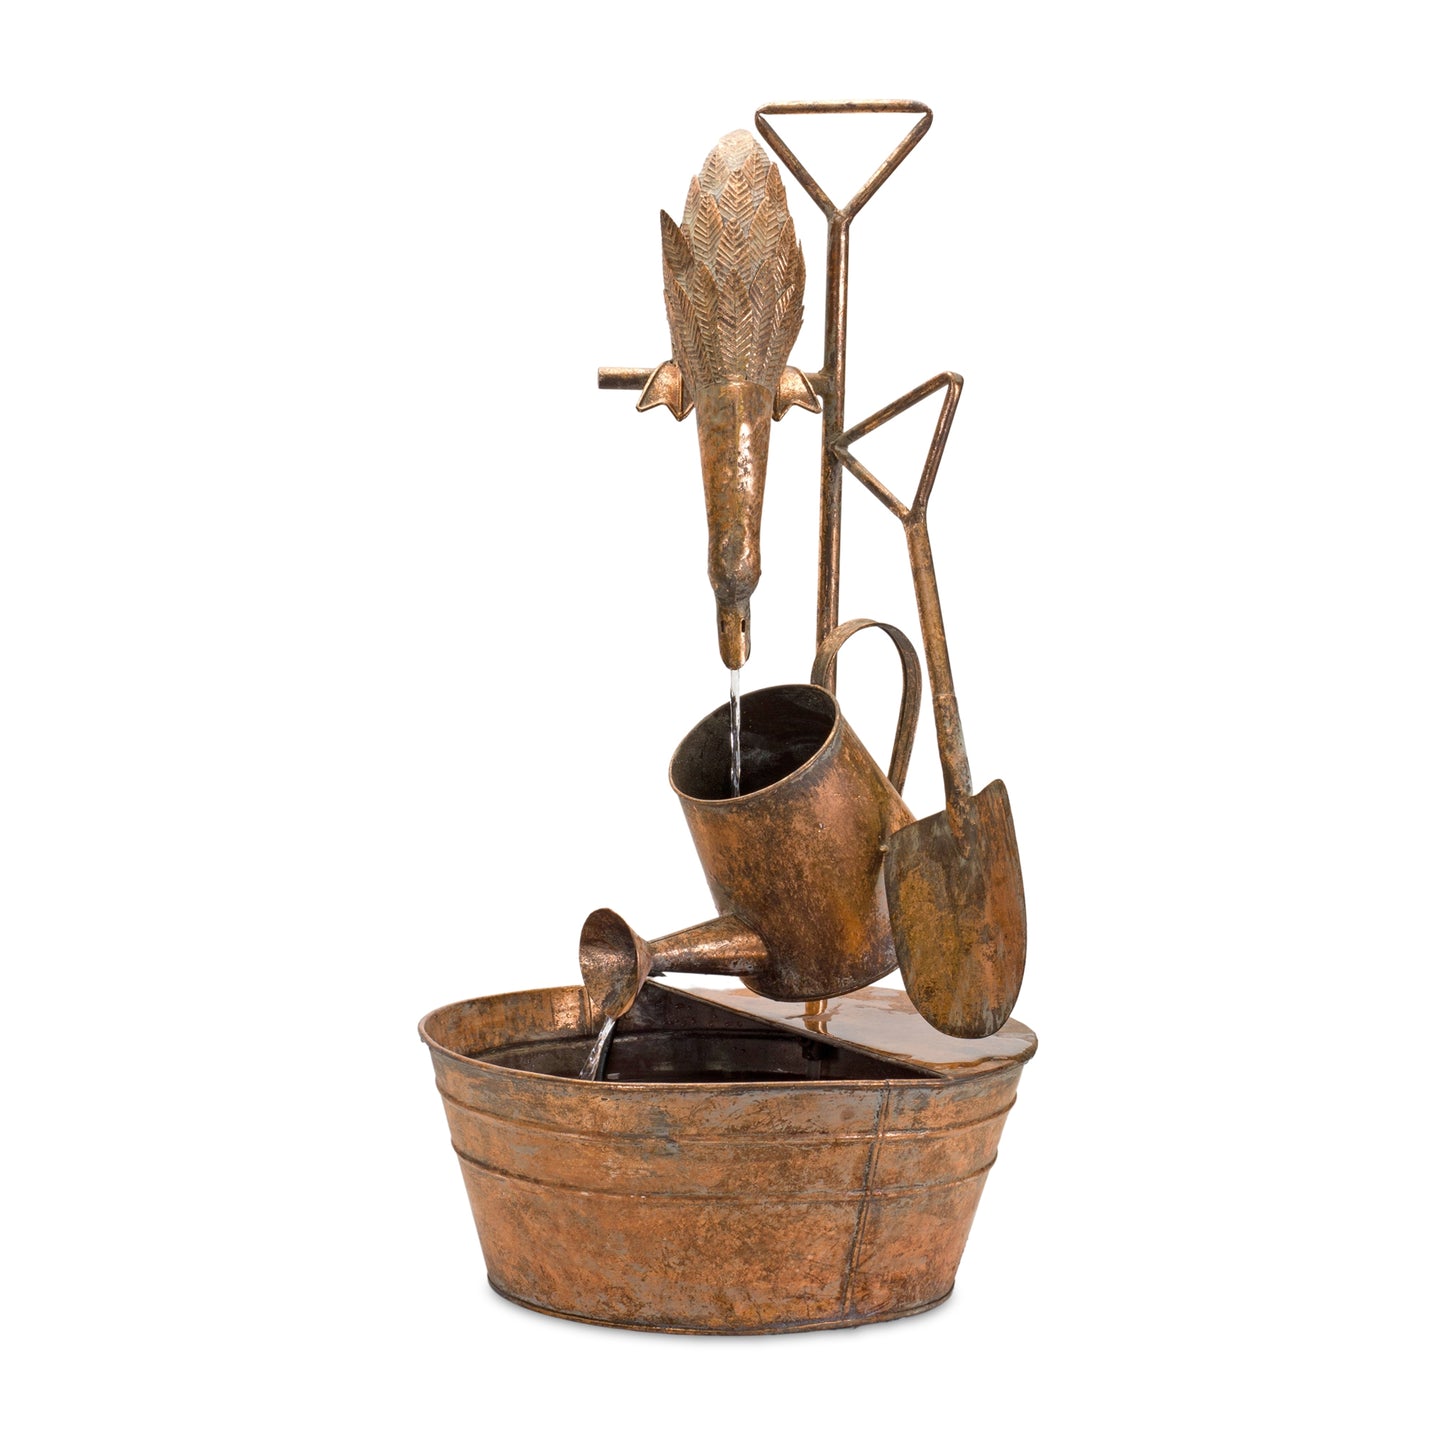 Rustic Metal Fountain with Duck and Watering Can 33"H